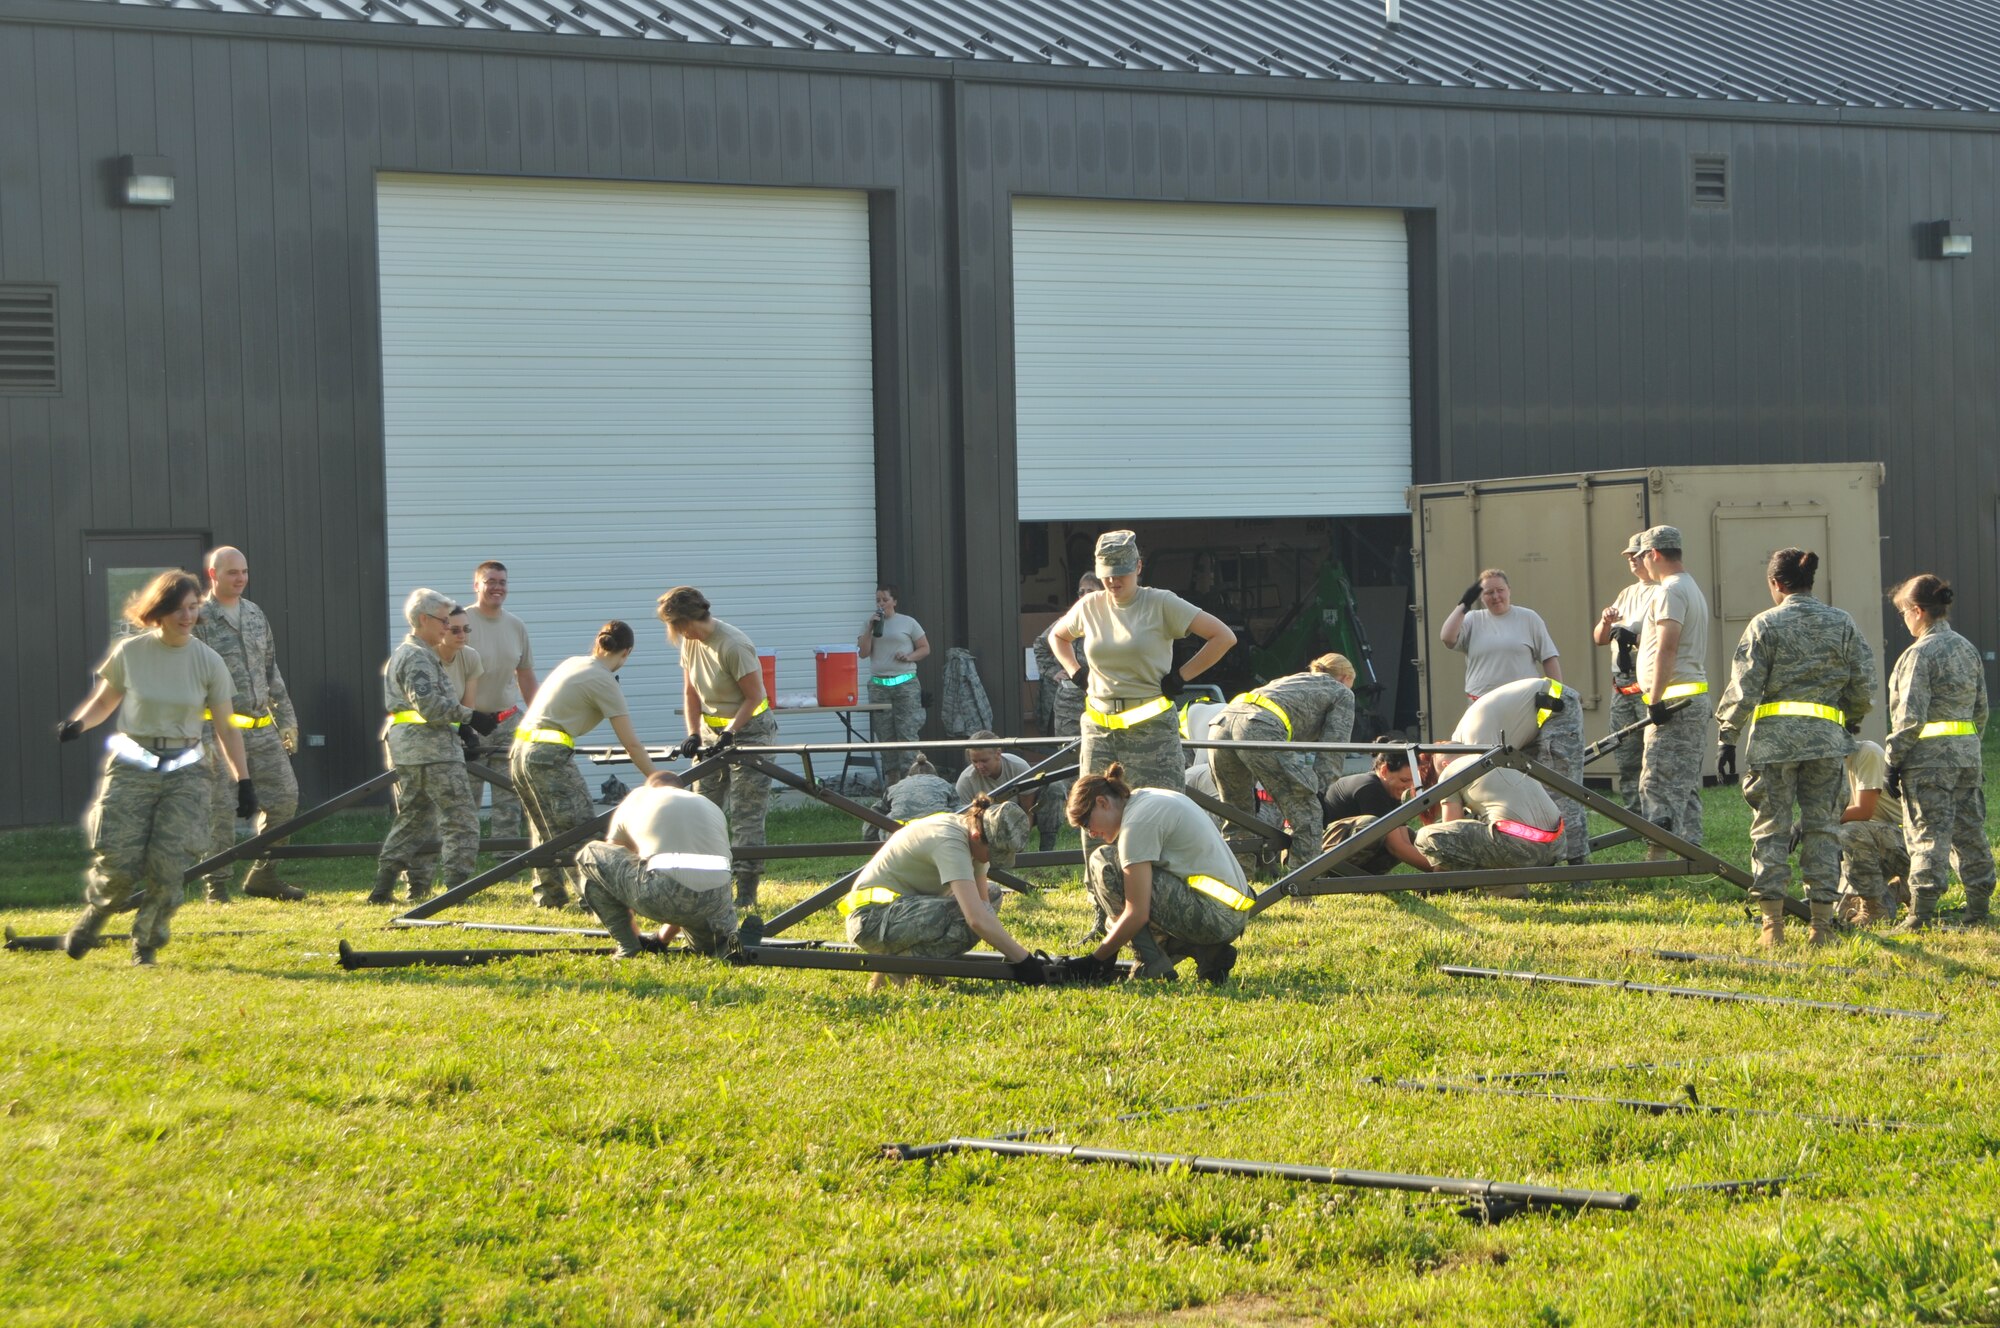 The 126th Force Support Squadron erect tents at the start of a three day
bivouac exercise at Scott AFB, Ill. Units of the 126th Air Refueling Wing,
Illinois Air National Guard, routinely practice deployment procedures to
maintain their state of readiness. (U.S. Air Force photo by Tech Sgt.
Johnathon Orrell)